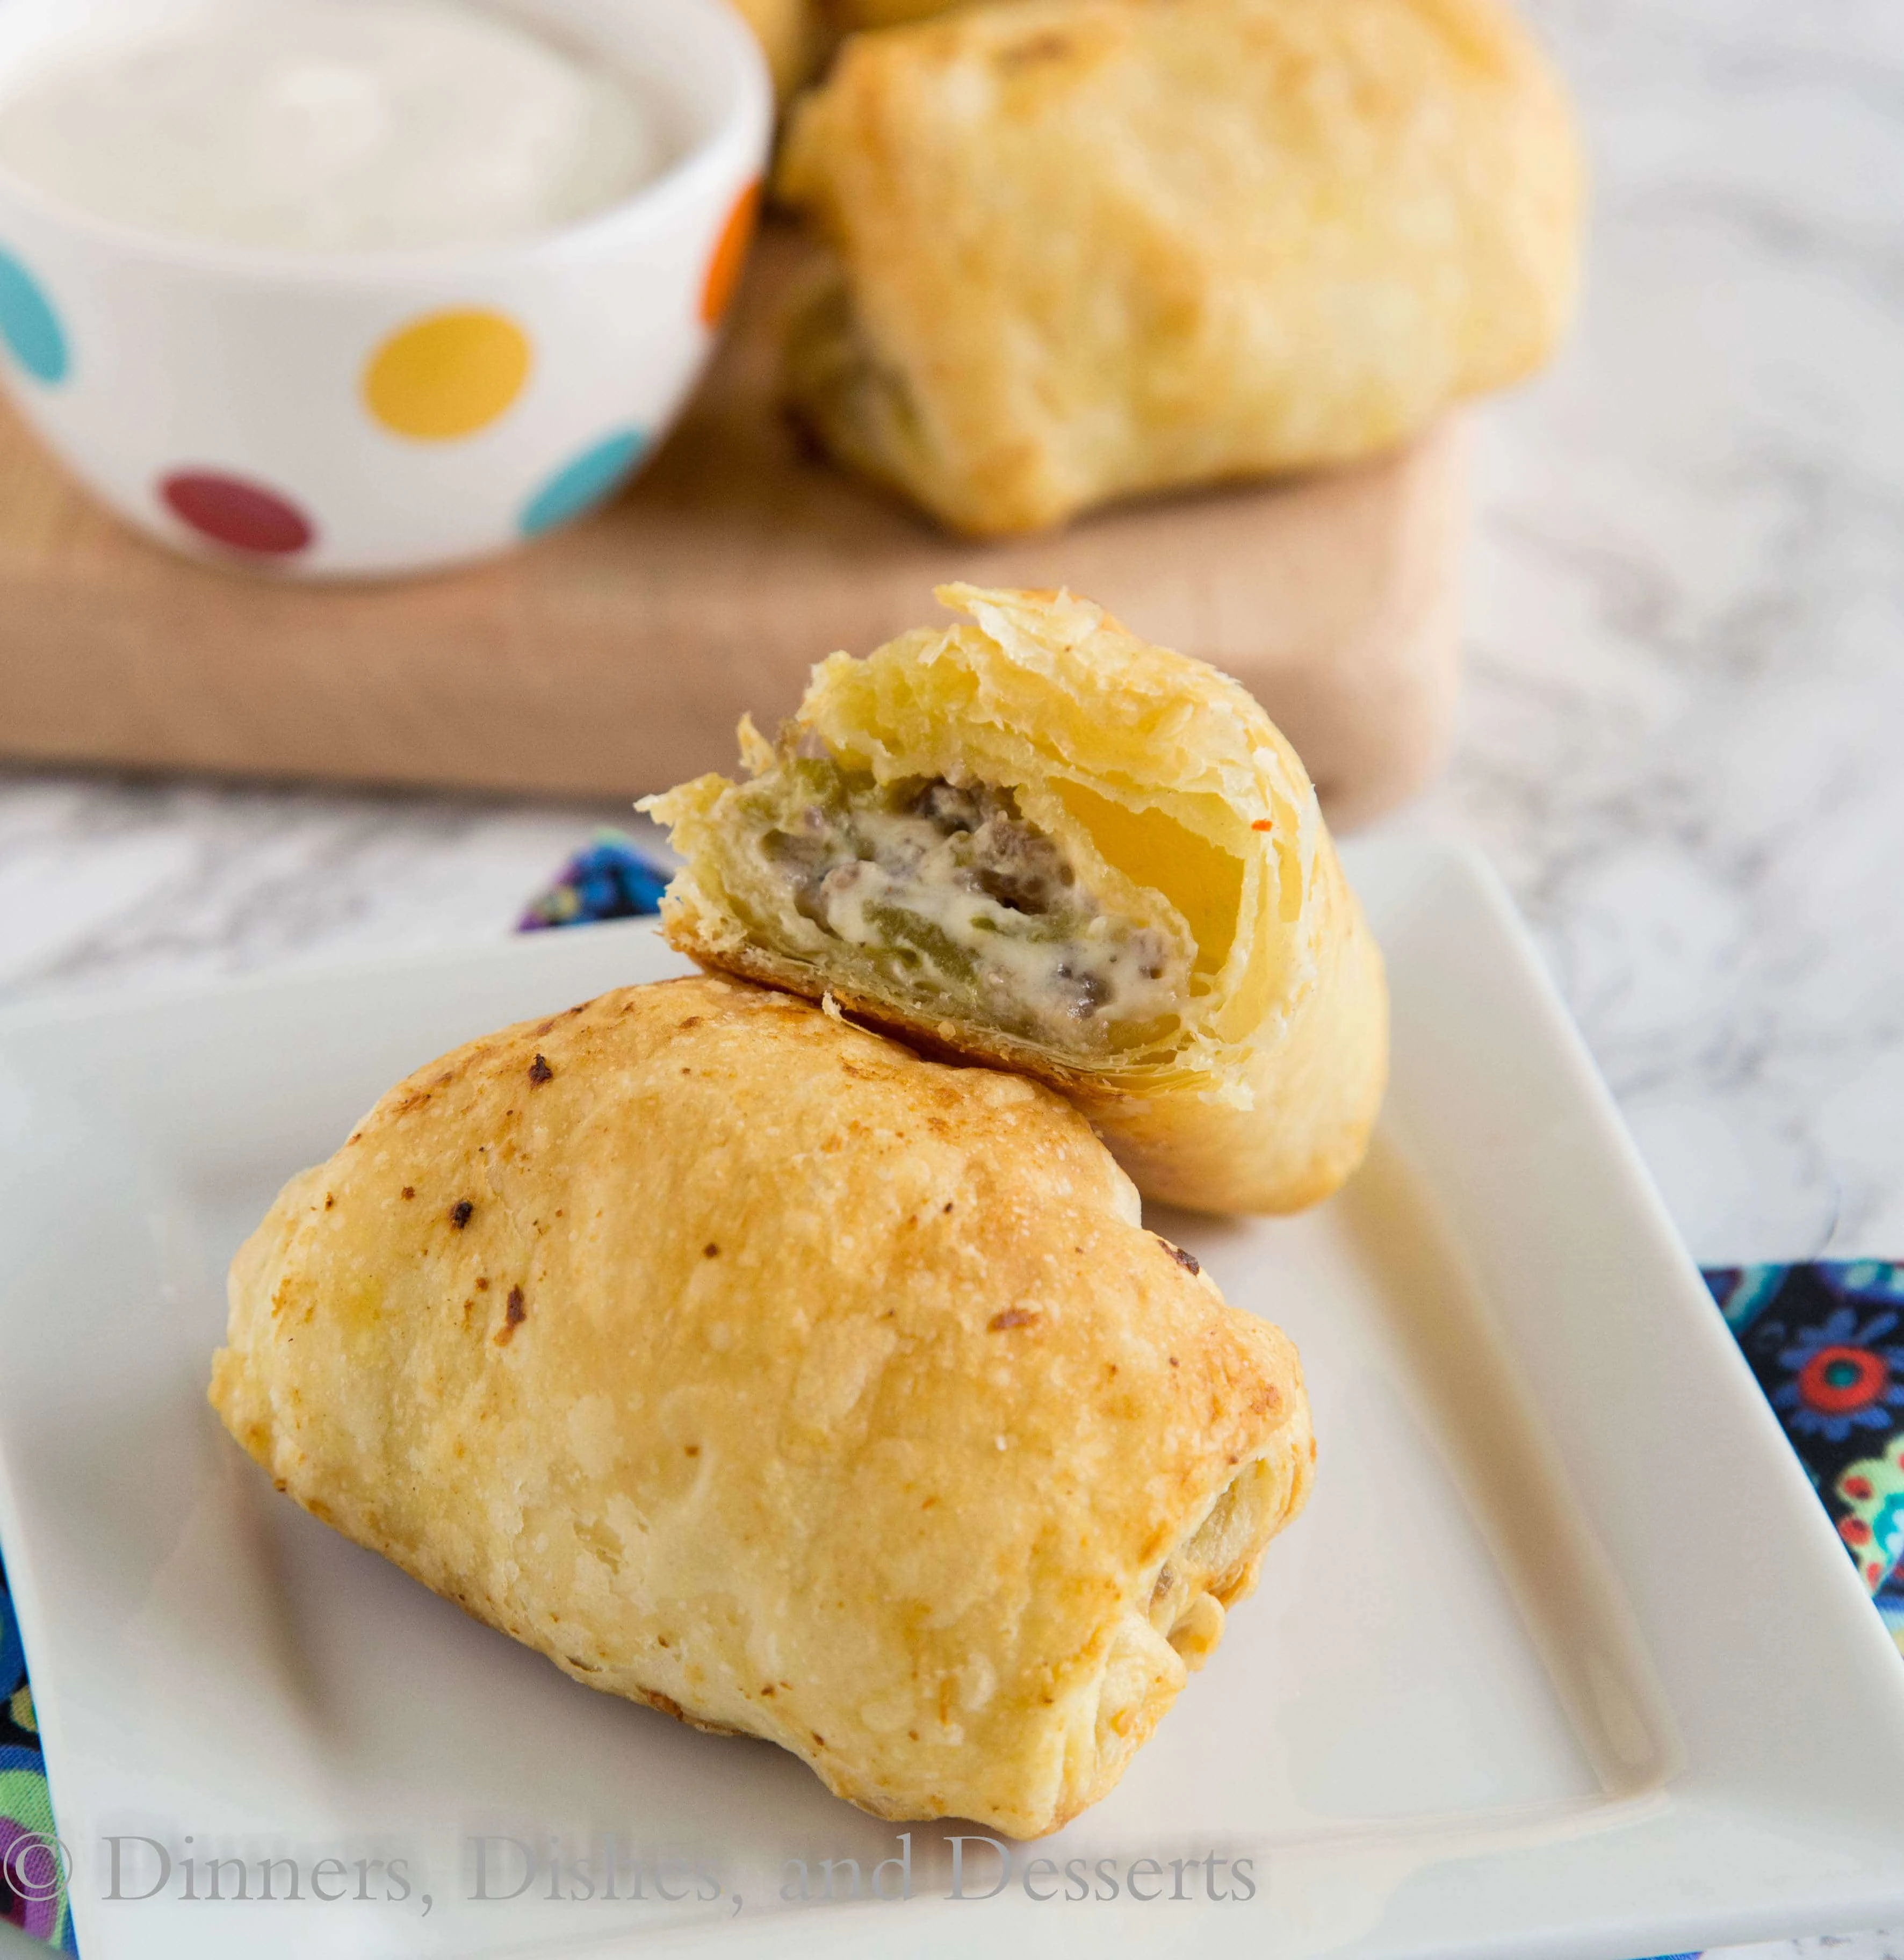 Spicy Sausage Rolls - Great for brunch or breakfast for dinner! A creamy, cheesy, spicy mixture with breakfast sausage is rolled with puff pastry and baked into flaky perfection!